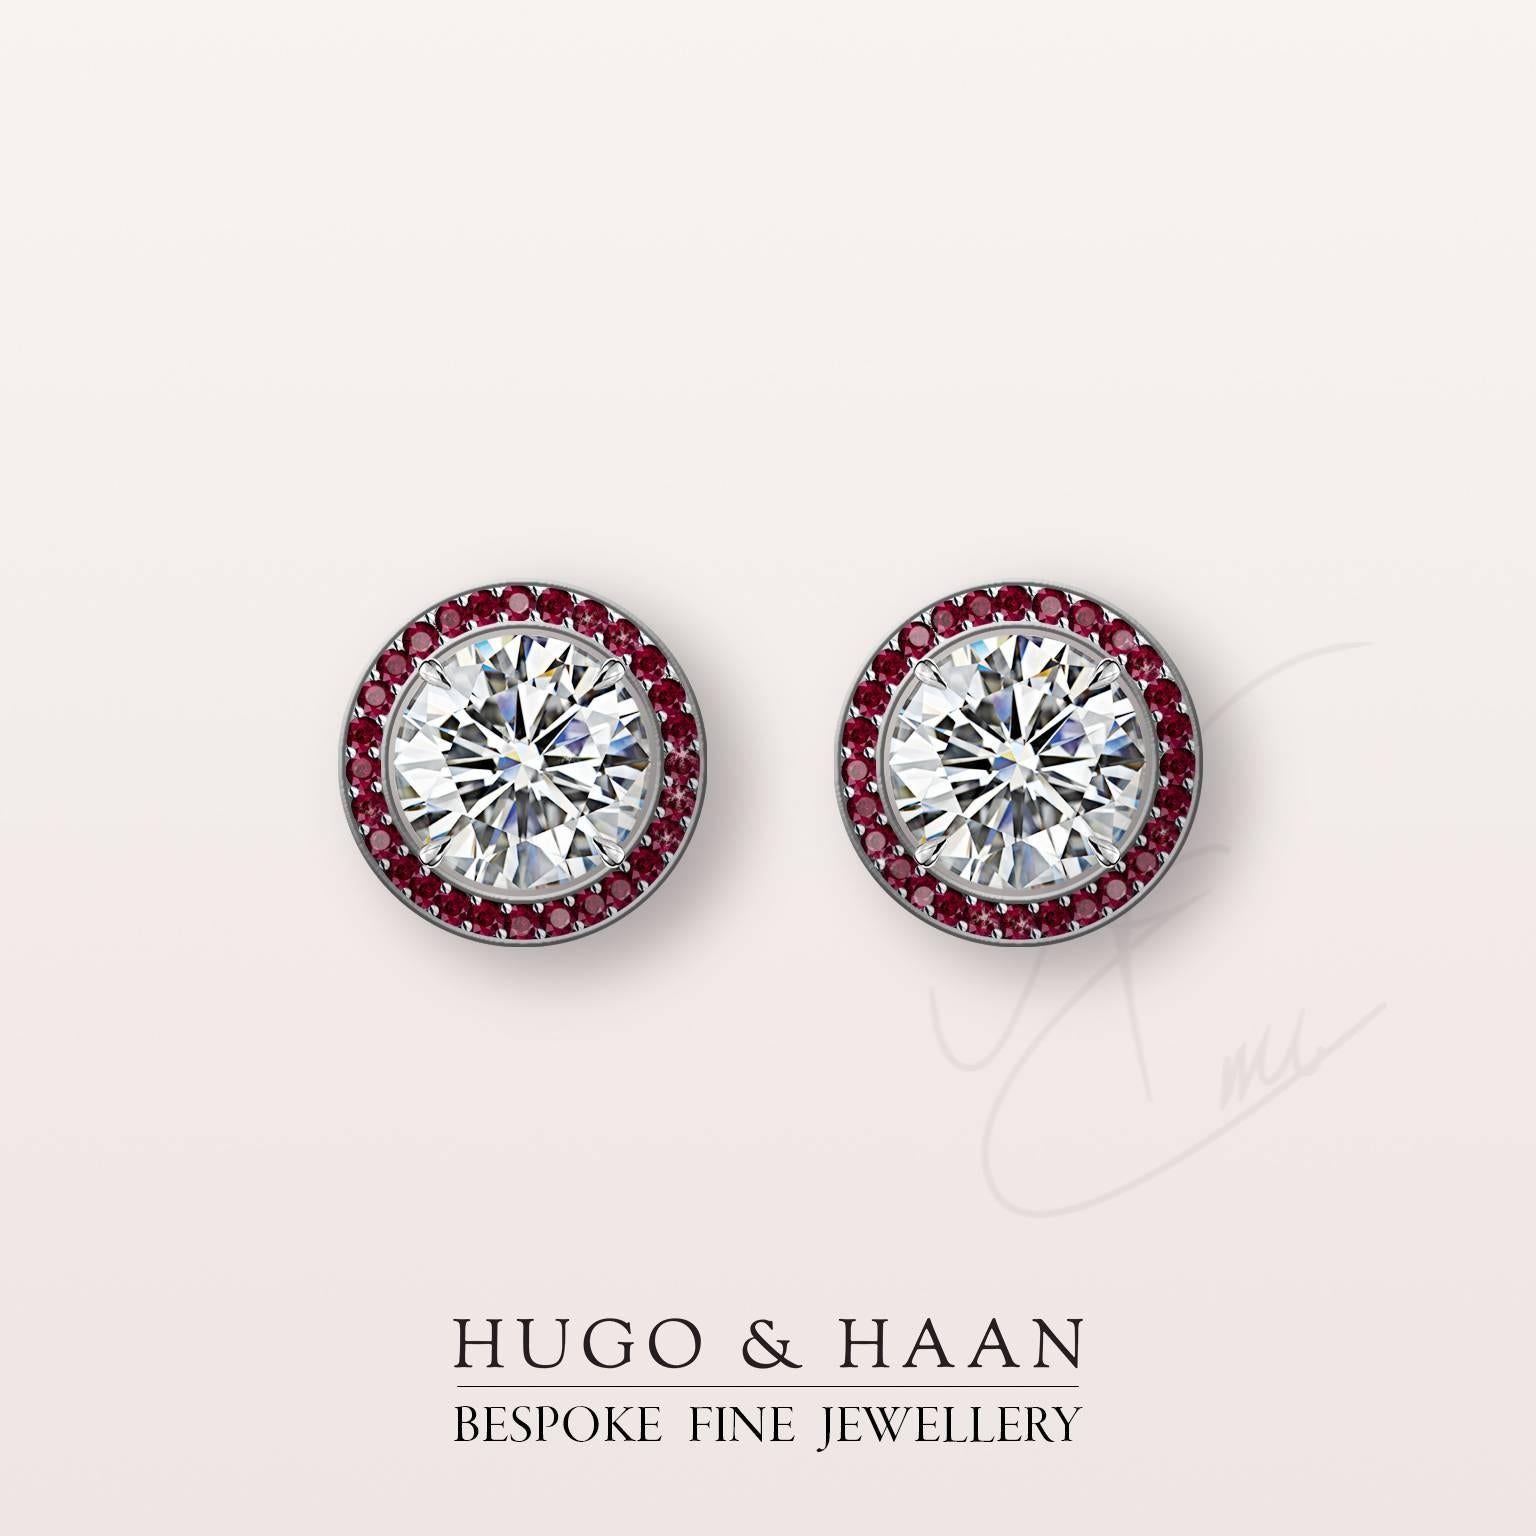 Details:

Material : Platinum
Principle Gemstone : Round Brilliant Cut White Diamond
Other Gemstone : Round Rubies
Total Diamond Carat Weight : over 2 tcw 
Diamonds Certified: Yes - GIA certified
Customizable: Yes

Options to customize: 

Metals